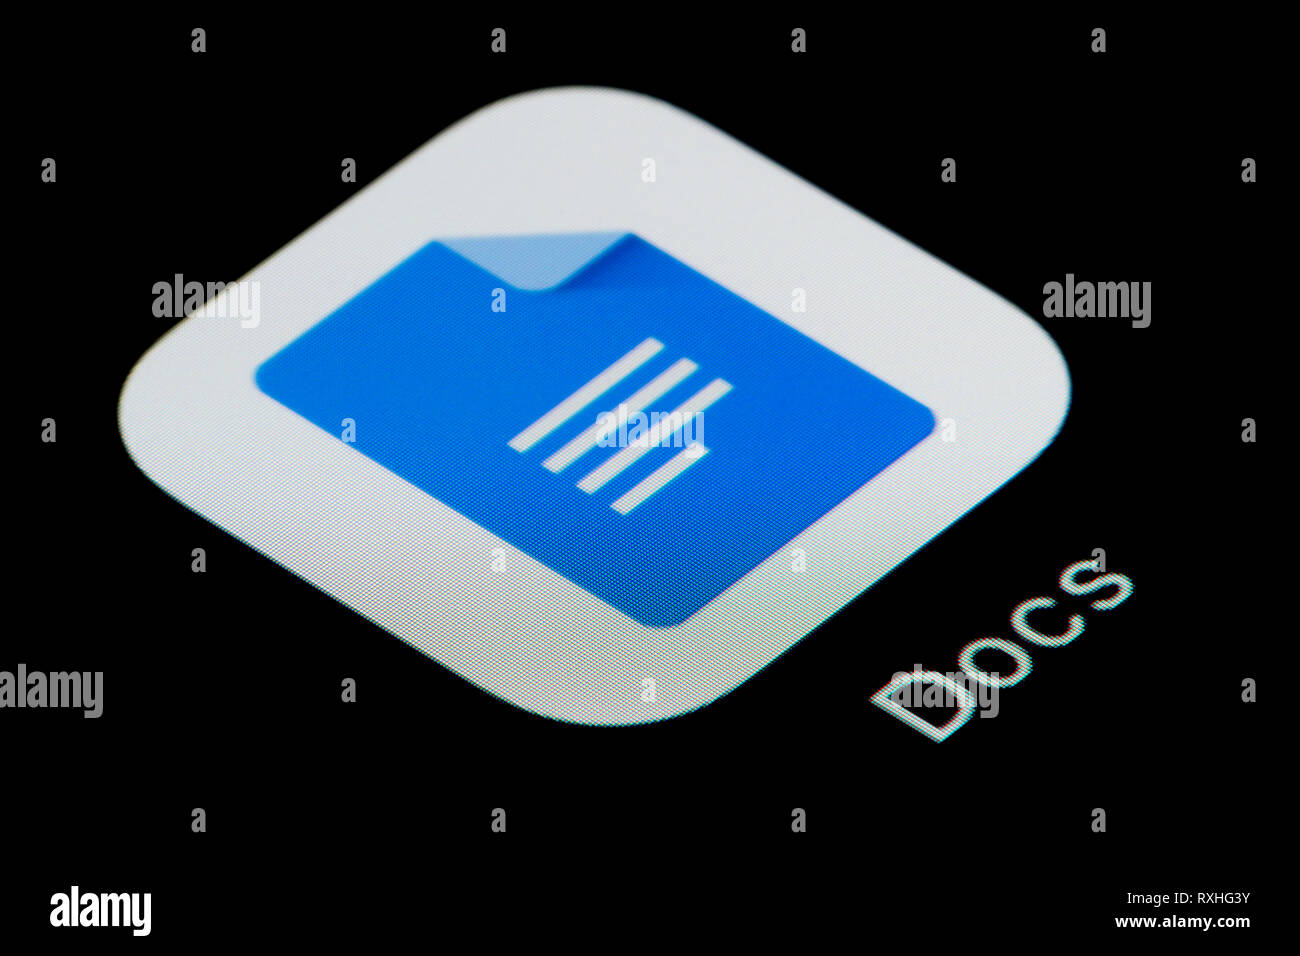 A close-up shot of the Google Docs app icon, as seen on the screen of a smart phone (Editorial use only) Stock Photo